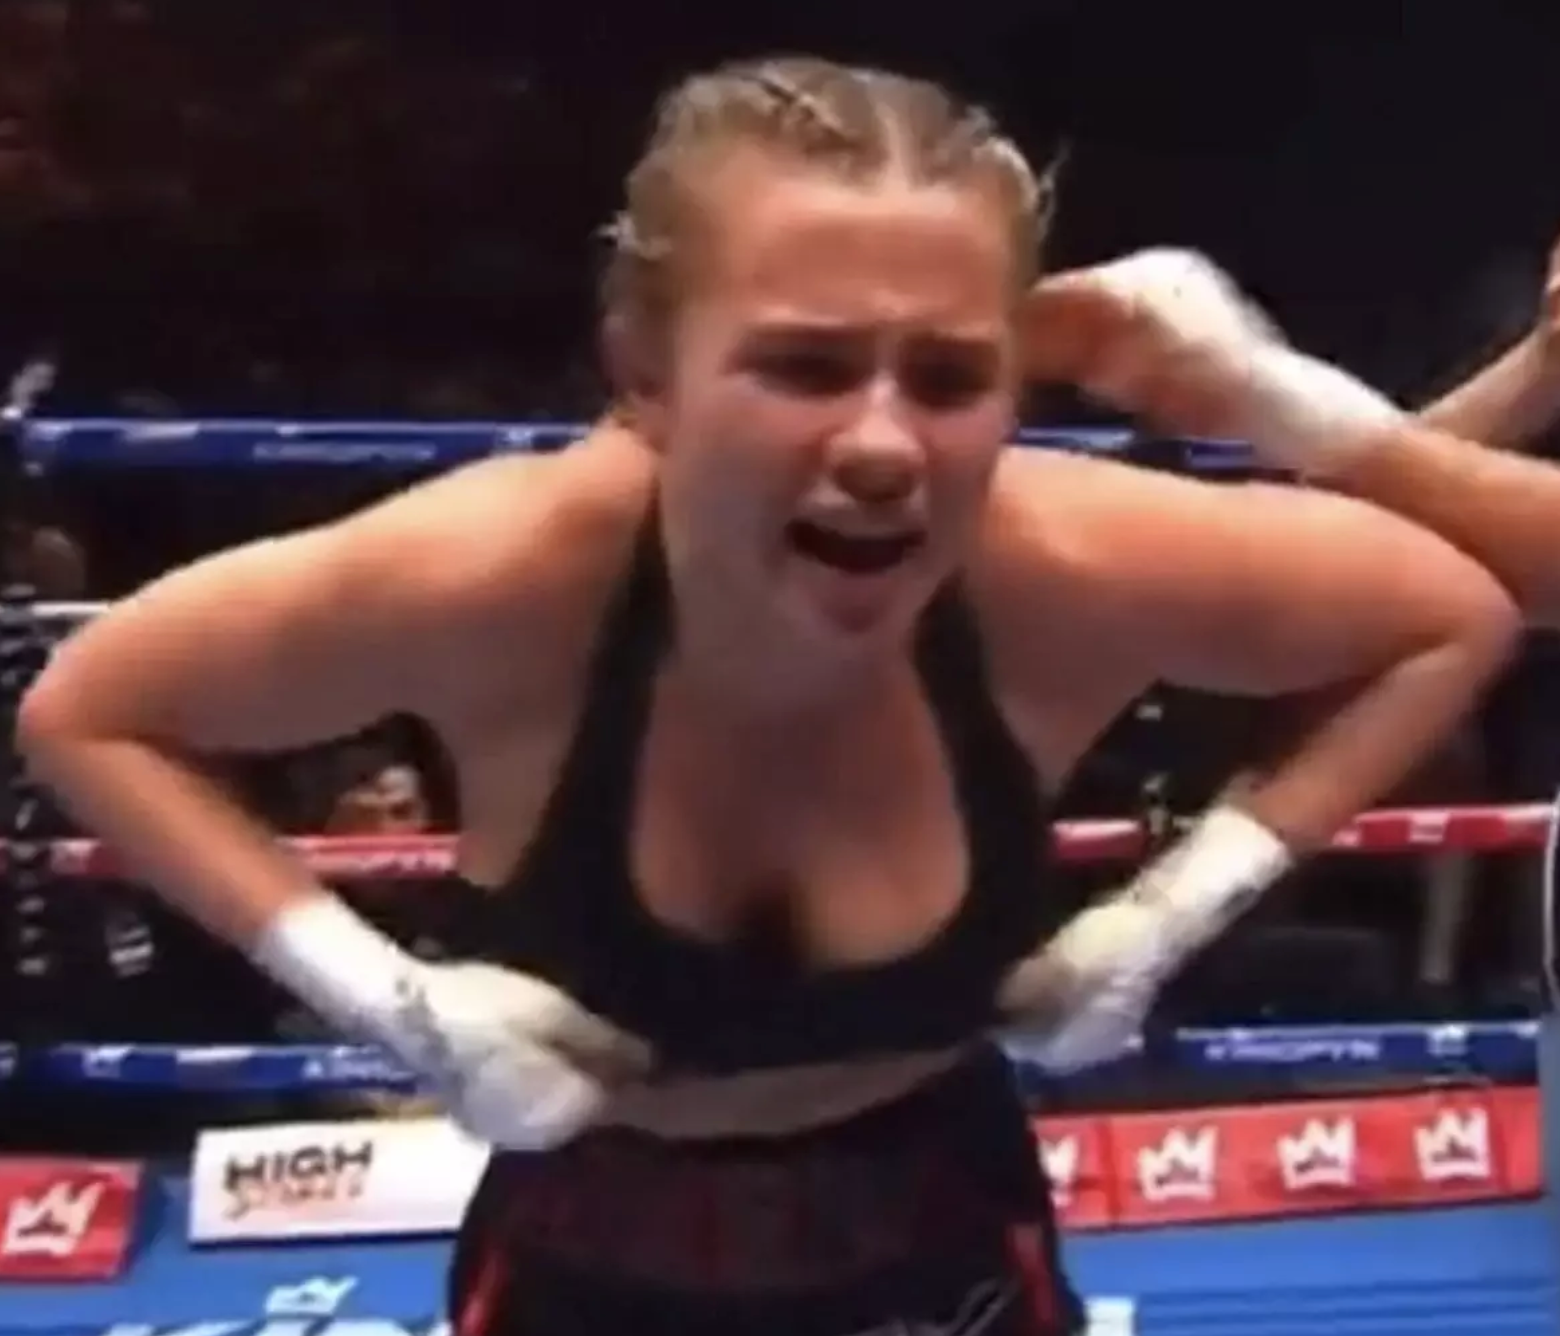 Boxer Daniella Hemsley has been banned from final after she lifted up her top in celebration